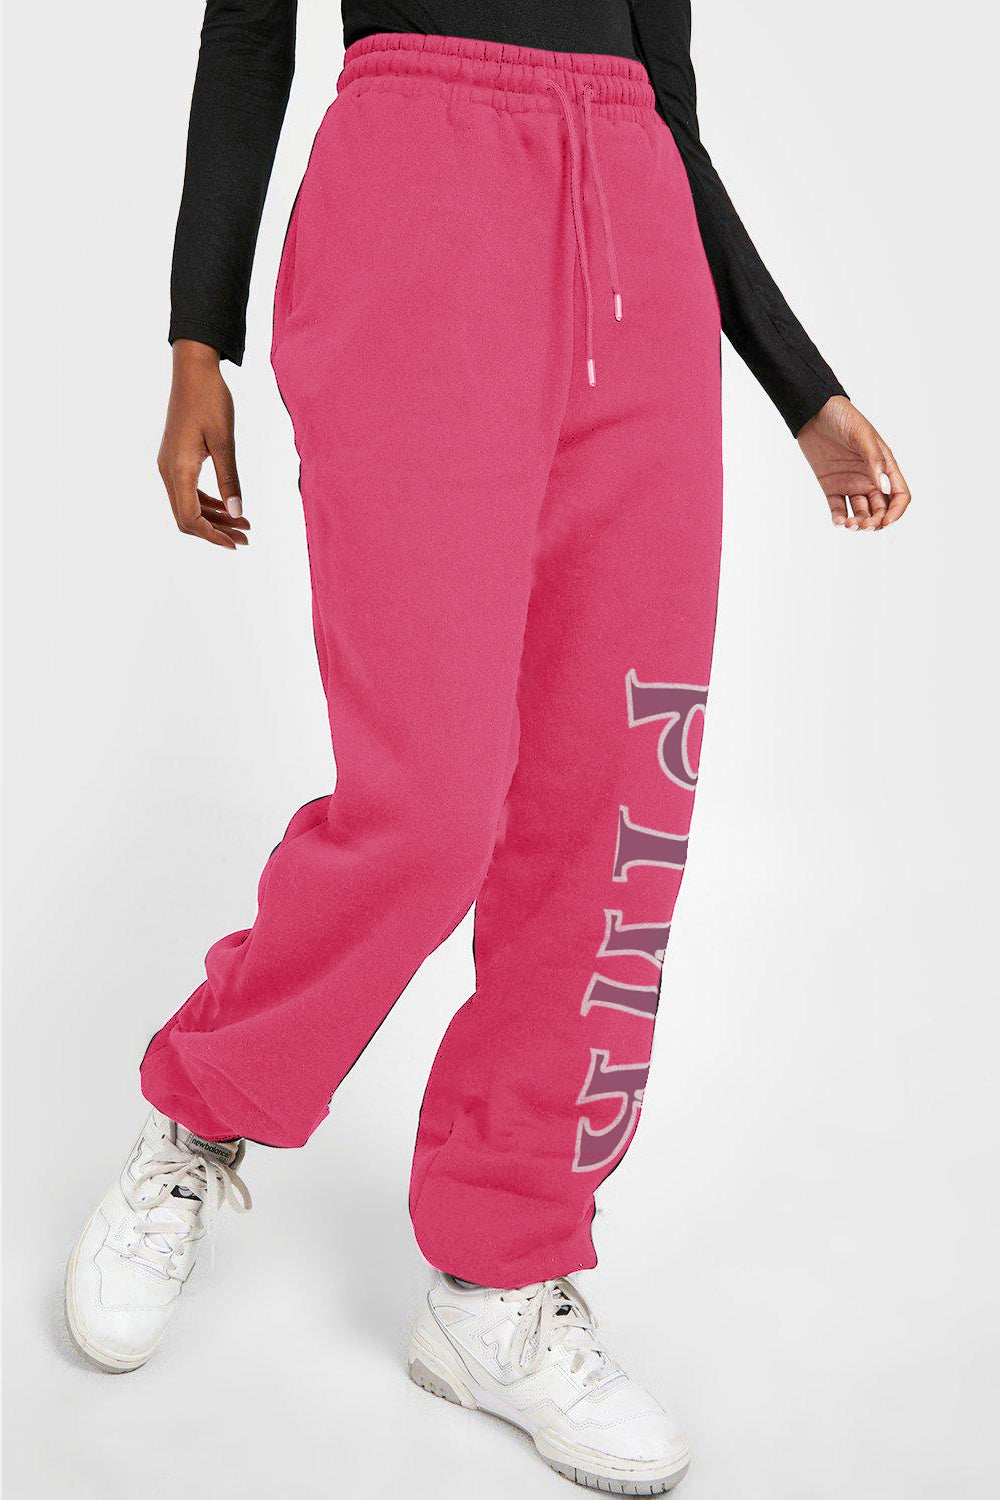 Simply Love Full Size PINK Graphic Sweatpants Trendsi